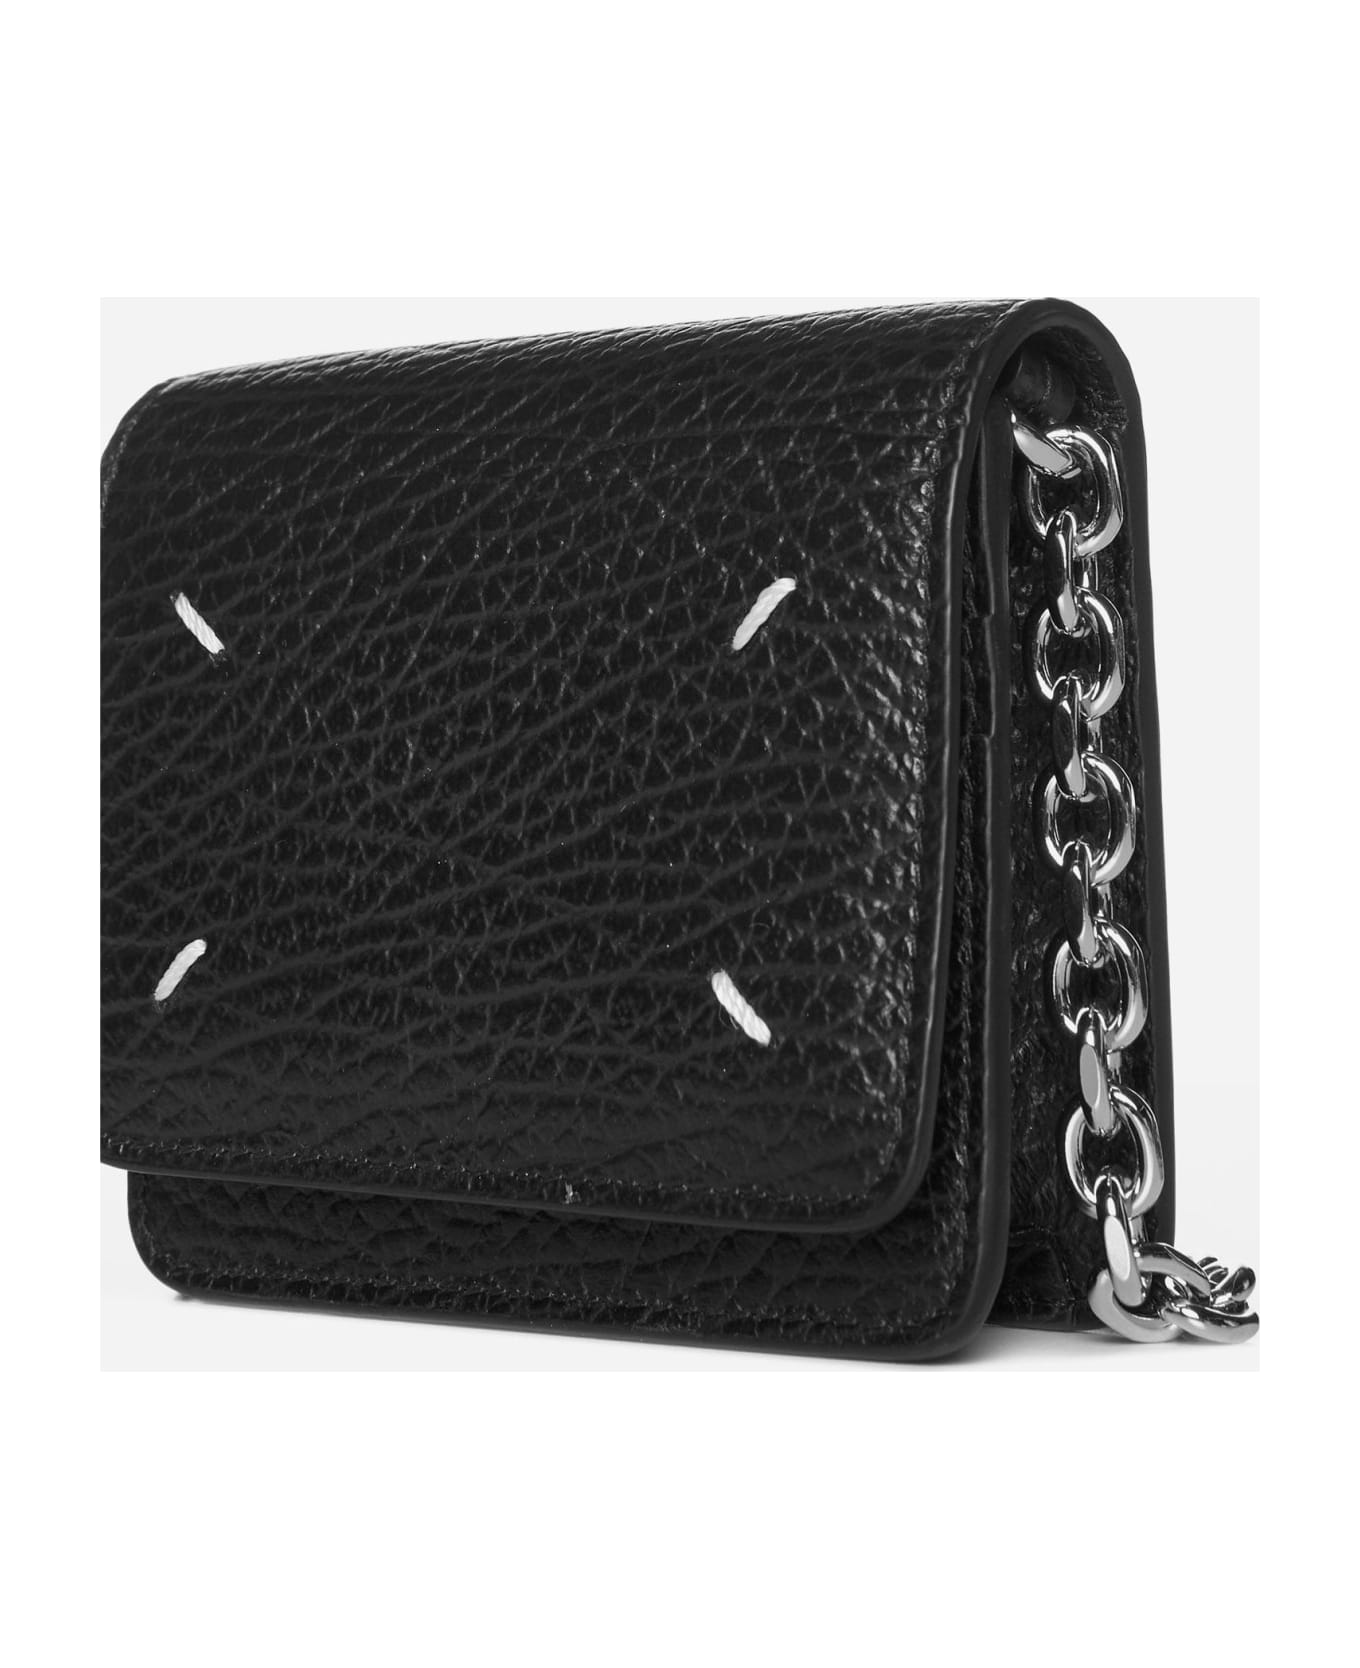 Maison Margiela Small Leather Chain Wallet Bag - T8013 ショルダーバッグ